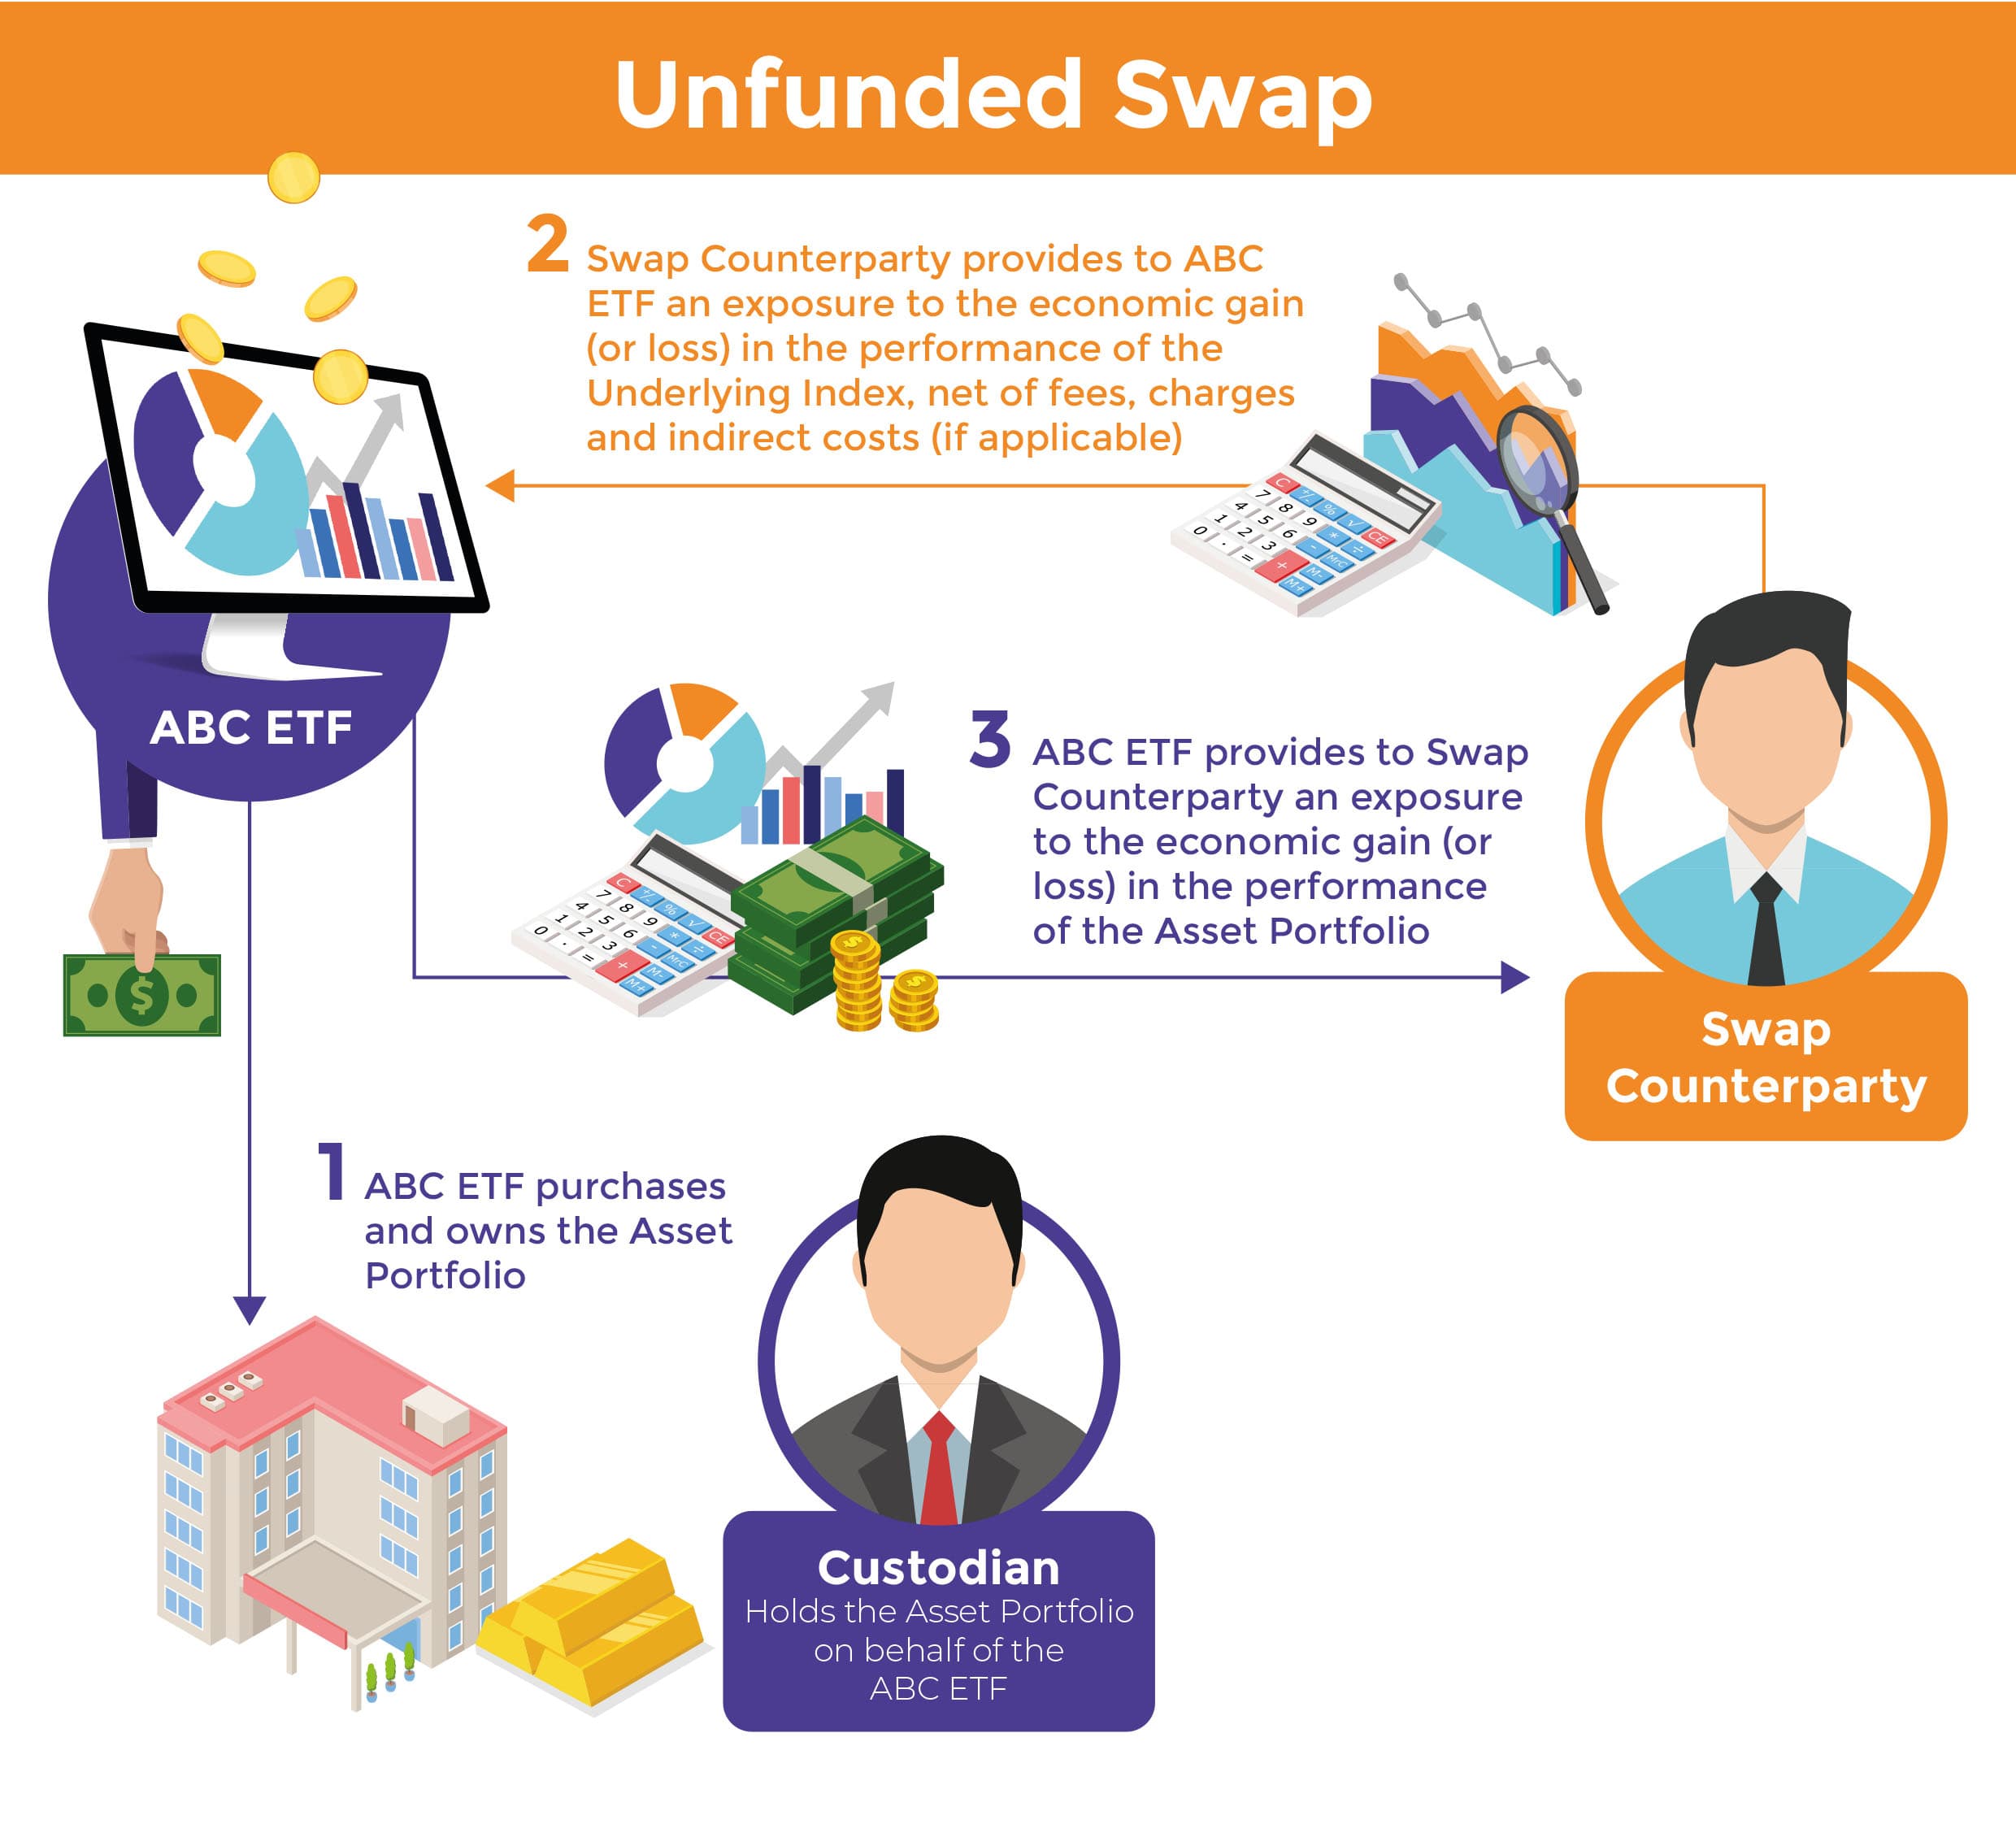 Unfunded swap - The Chin Family